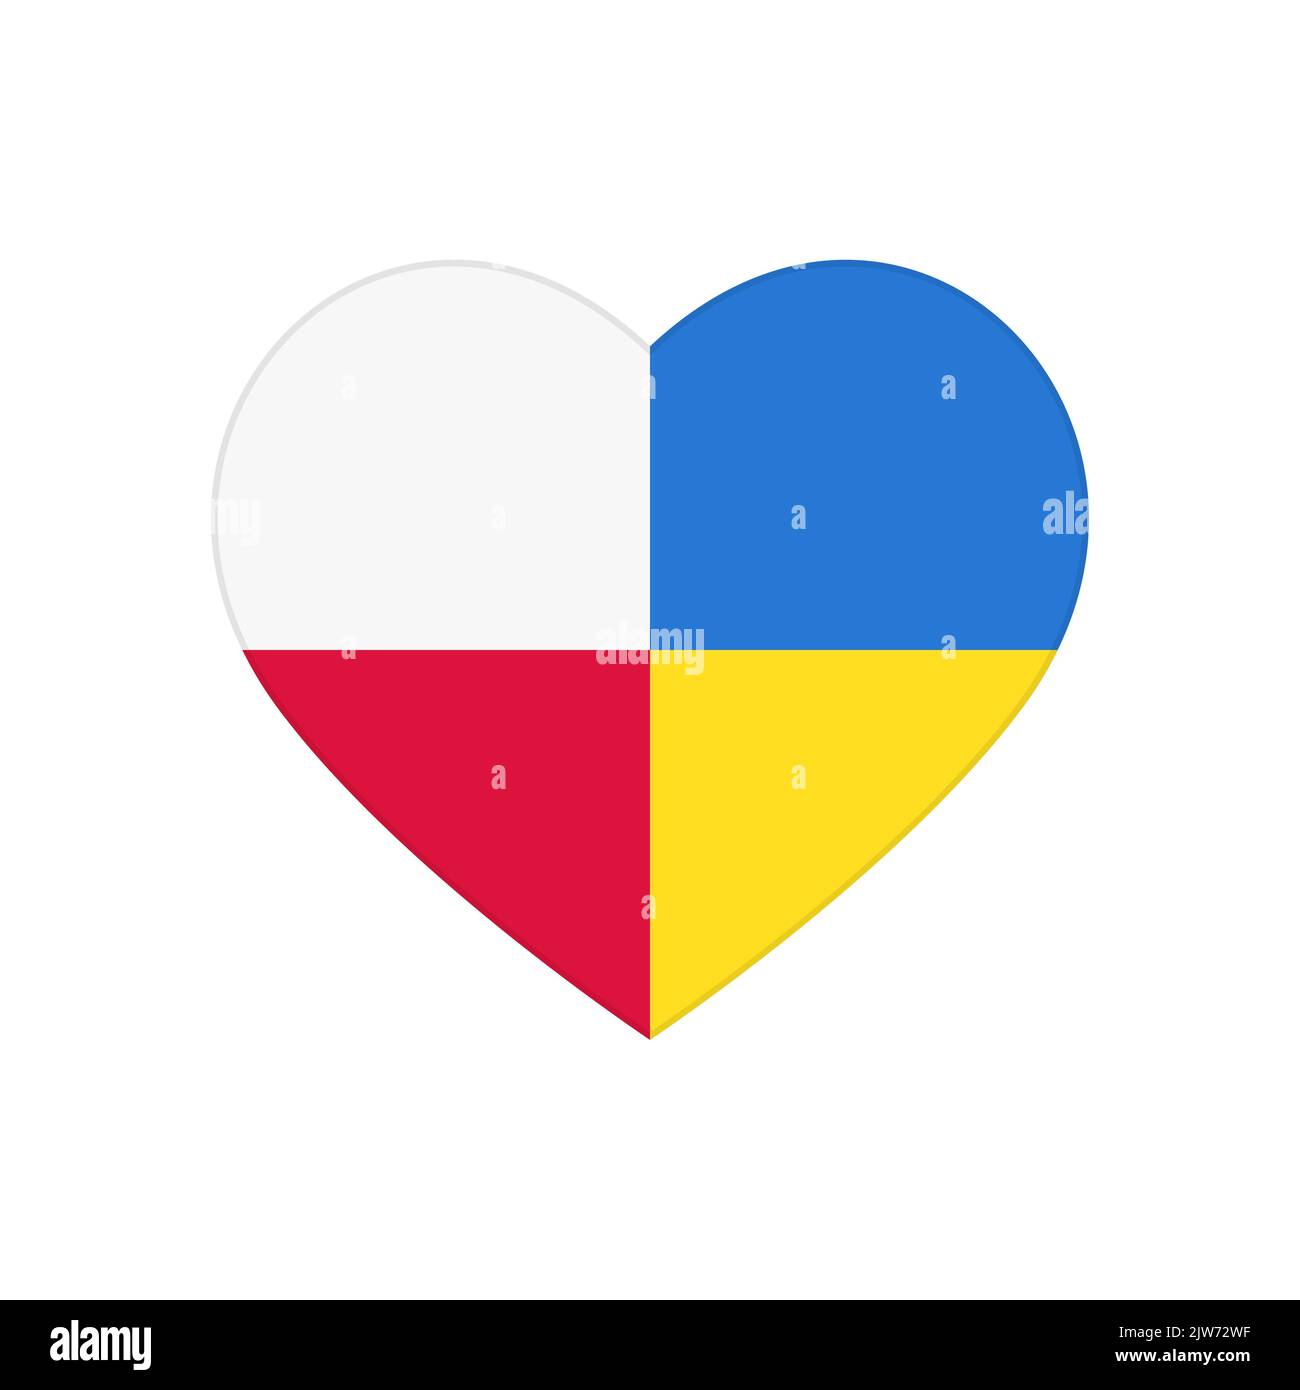 Heart puzzle pieces of Poland and Ukraine flags. Partnership, friendship and support of Polish people and government for Ukrainian citizens and army, symbol of love and peace between nations Stock Vector